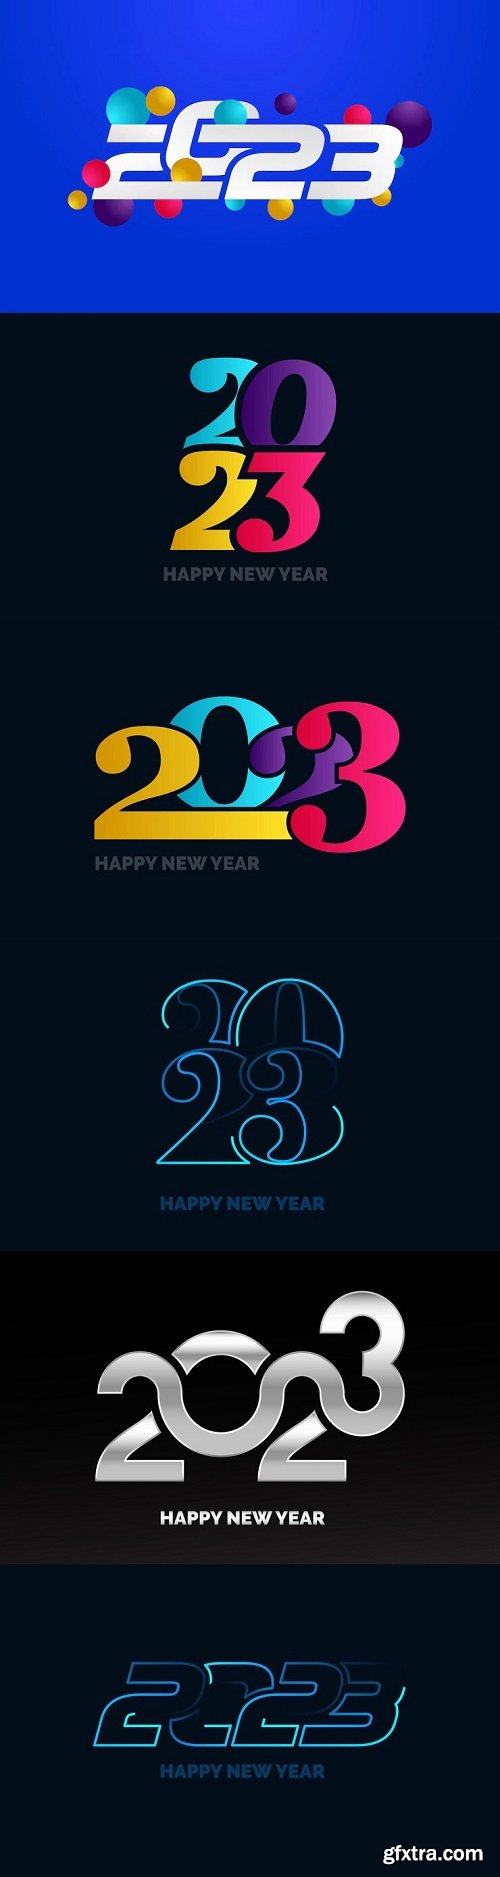 New 2023 year typography design 2023 numbers logotype illustration vector illustration